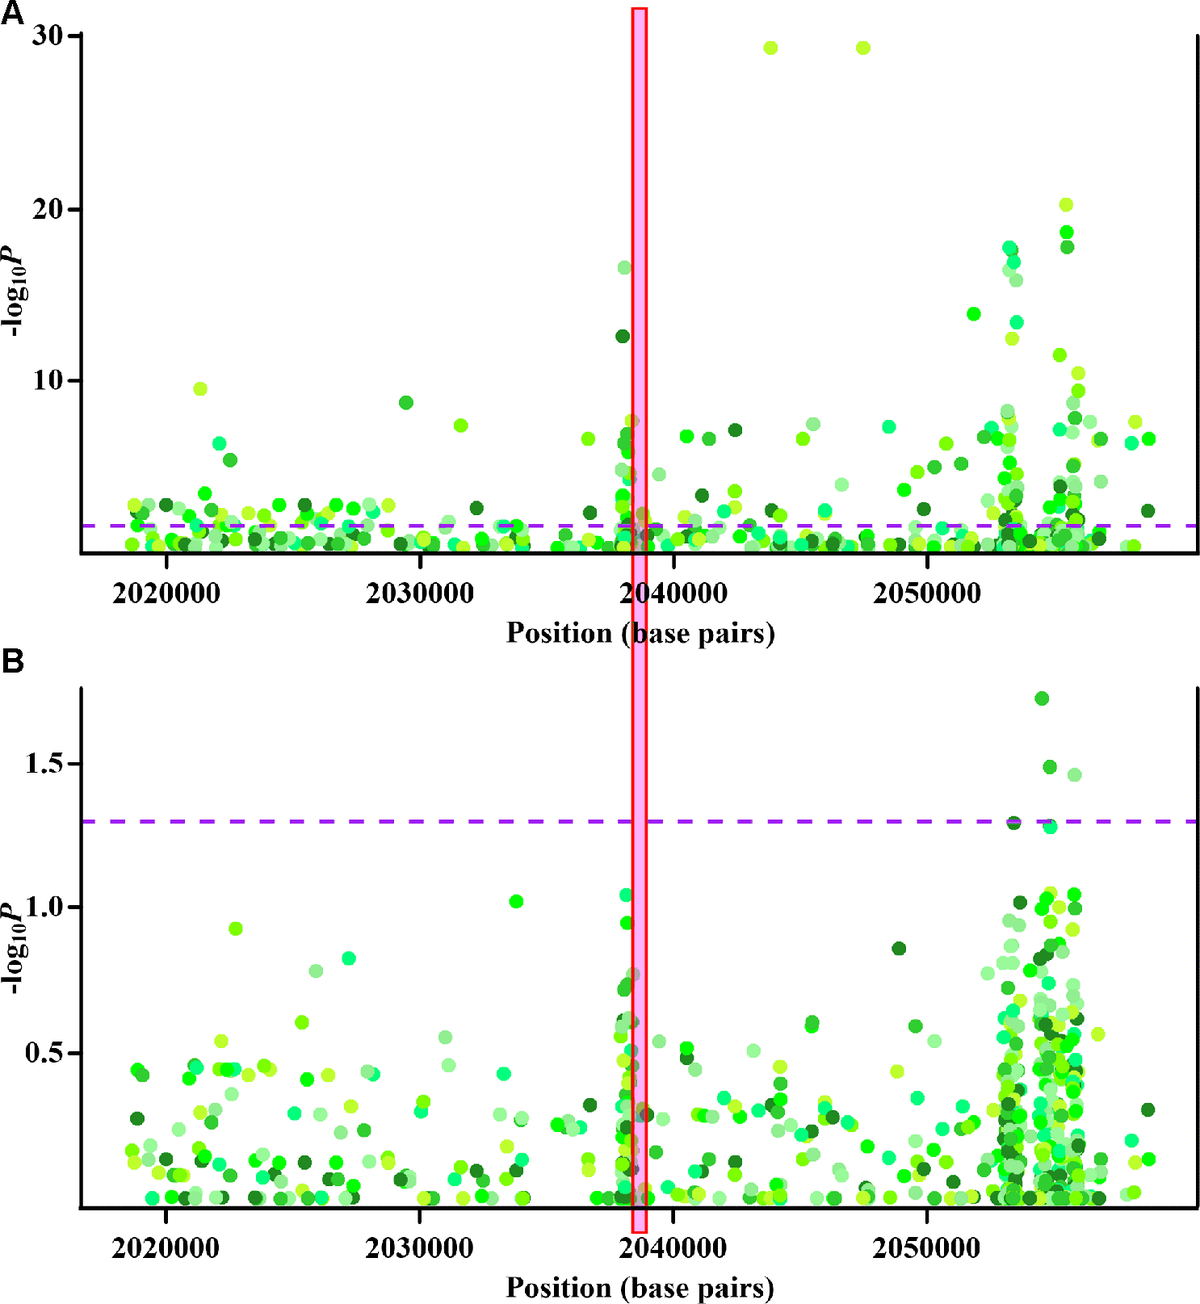 Cis-methyl-quantitative trait locus (cis-meQTL) and genetic analysis of cg22626579. (A) Regional association plots of monocyte-specific associations between nearby genetic variants and cg22626579 methylation. X-axis represents positions on respective chromosome. Y axis represents minus log10P of monocyte-specific associations between genetic variants and cg22626579 methylation. (B) Regional association plots of monocyte-specific associations between nearby genetic variants and gout. X-axis represents positions on respective chromosome. Y axis represents minus log10P of monocyte-specific associations between genetic variants and gout. Every point is one genetic variant colored with respective hue, with different colors implying different genetic variants. The dashed purple lines indicate the significance threshold (P = 0.05), and the red box highlights the location of cg22626579. Monocyte-specific associations of genetic variants with cg22626579 methylation and gout are analysed using multiple regression analysis, adjusting for sex, age, alcohol drinking, smoking status, smoking history (total pack-years) and cell fractions (see supplementary methods).